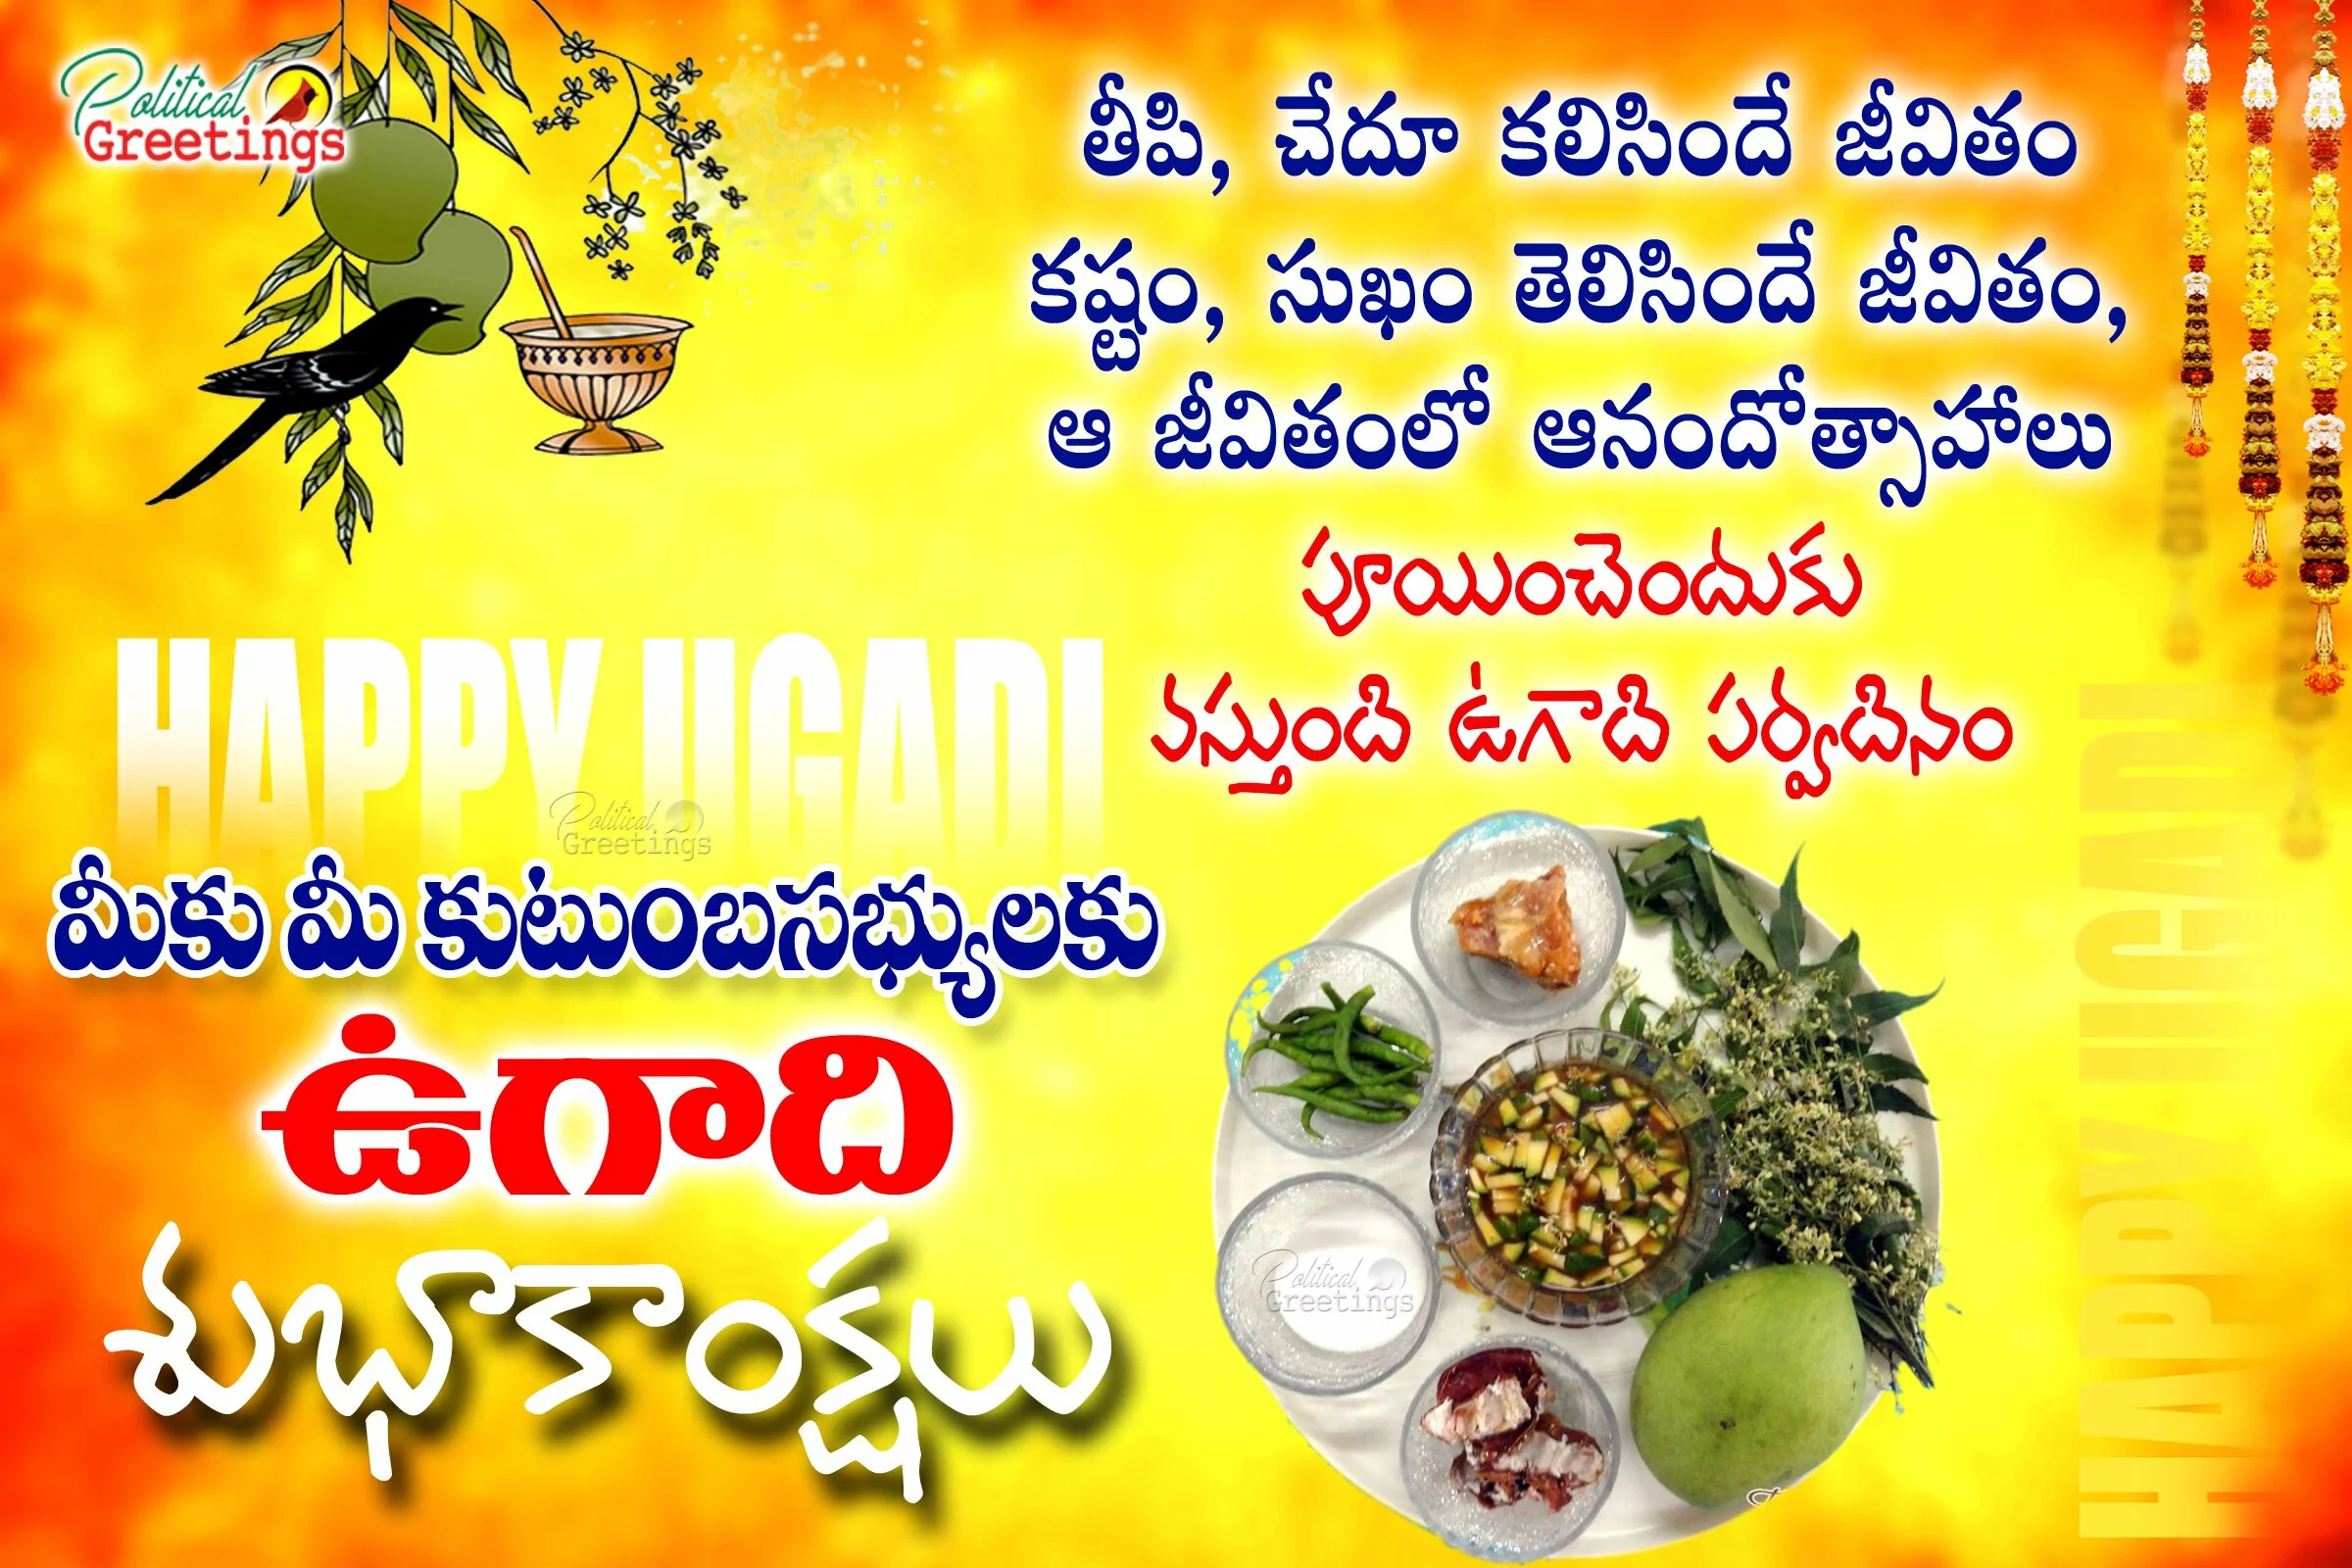 happy-ugadi-2017-telugu-wishes-quotes-greetings-sms-messages13